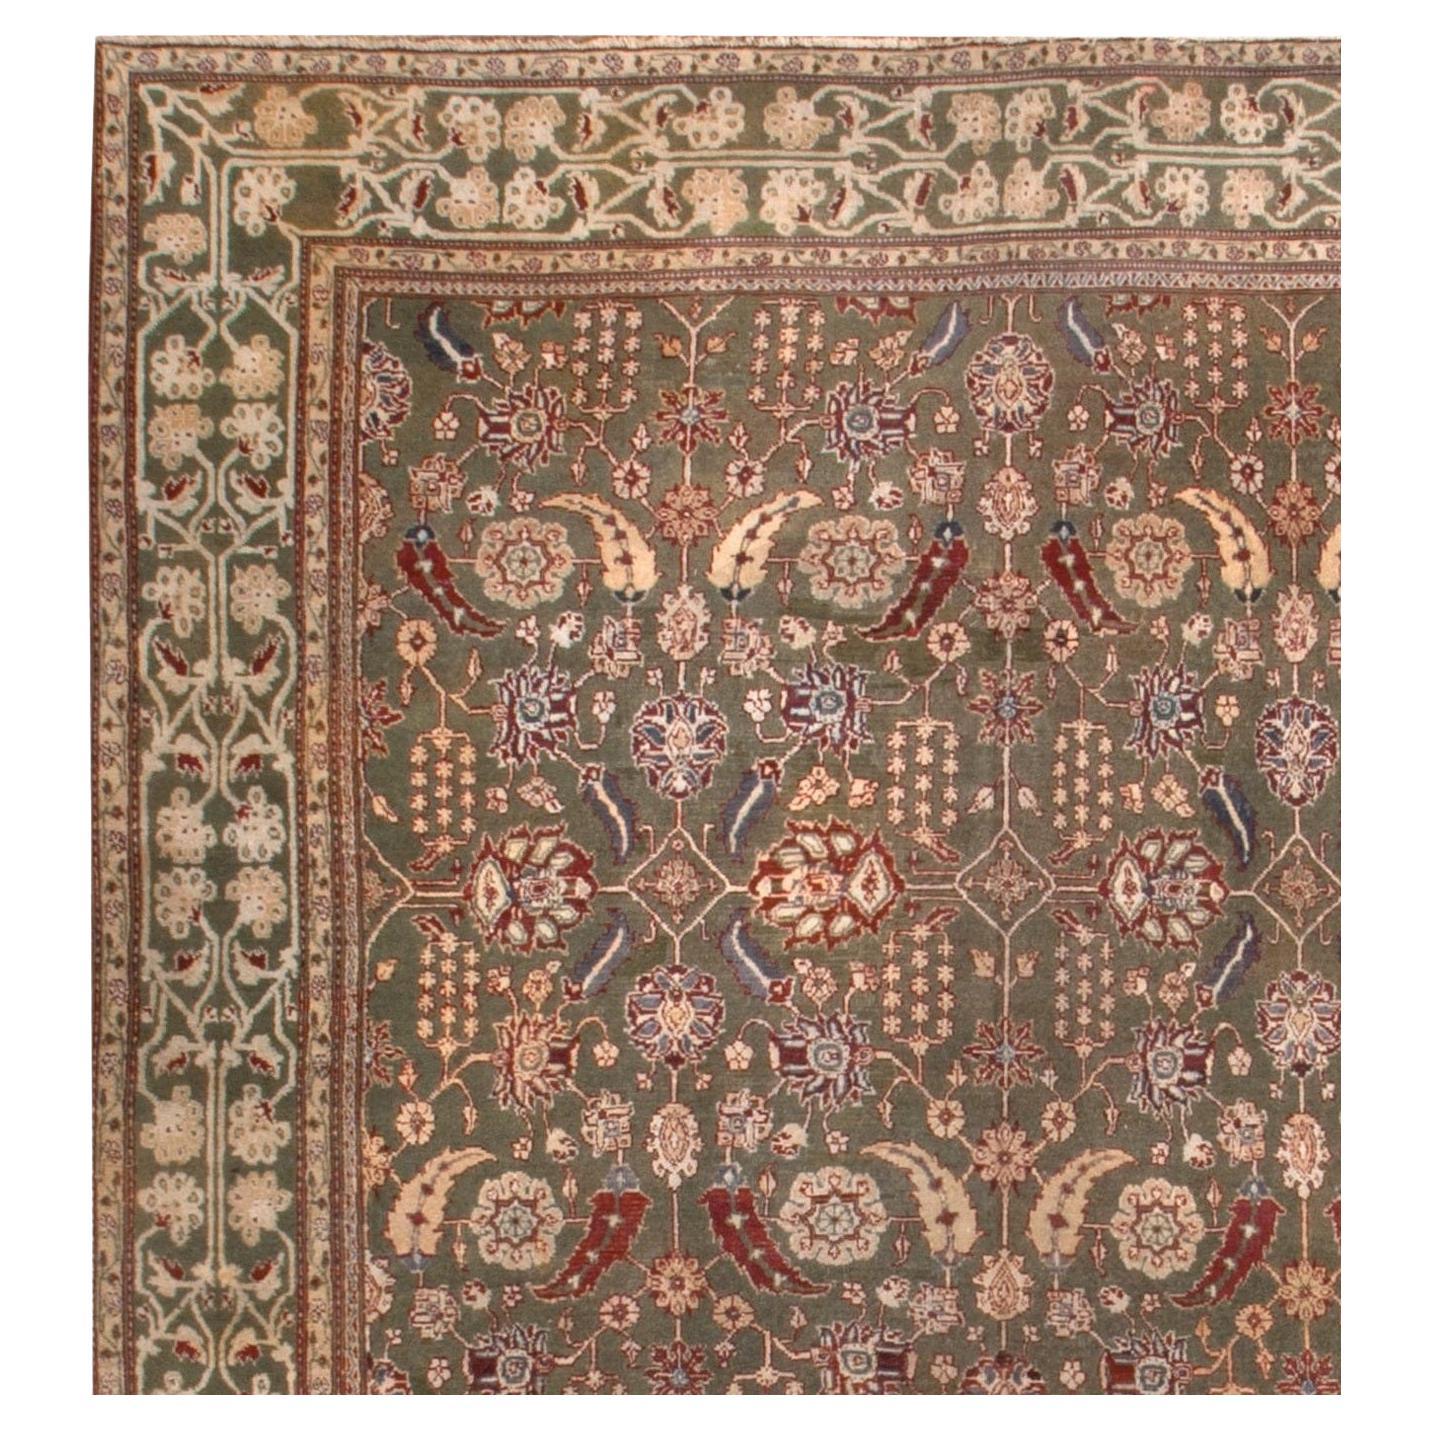 Antique Indian Sage Green Agra Rug,  8'10 x 11'6. During much of the history of the Mongol Empire, Agra was its capital city. Architects and artisans, including many carpet weavers, were brought here from all-over the Muslim world to enhance the